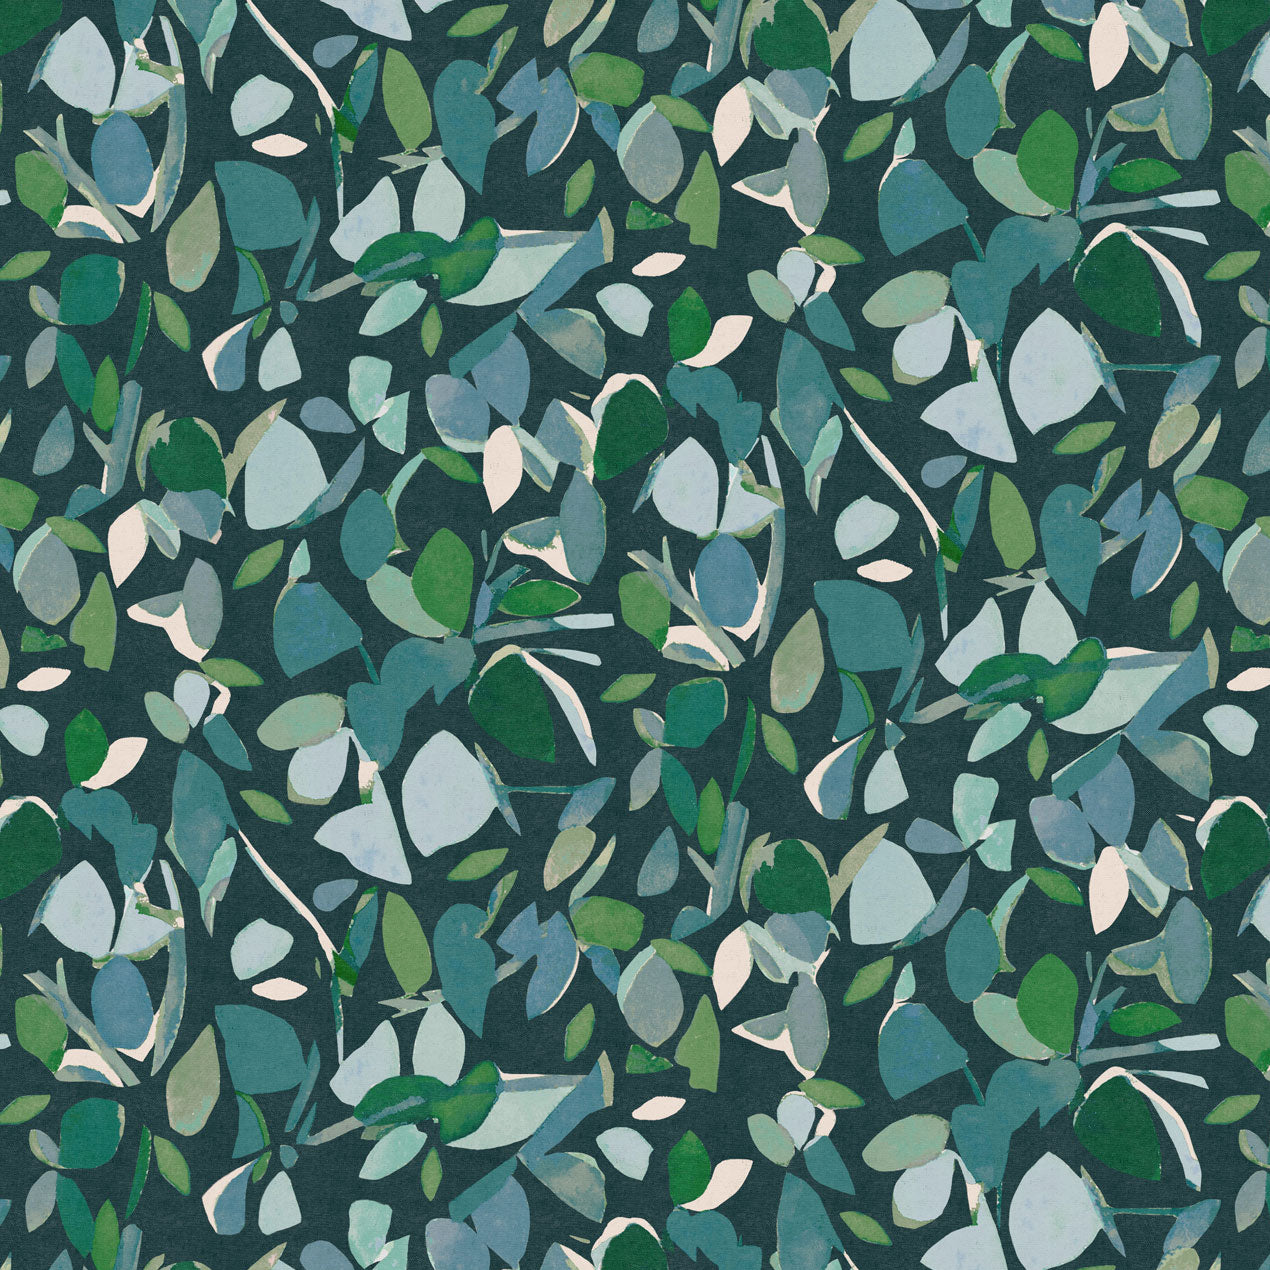 Detail of fabric in a minimal leaf print in shades of blue and green on a navy field.